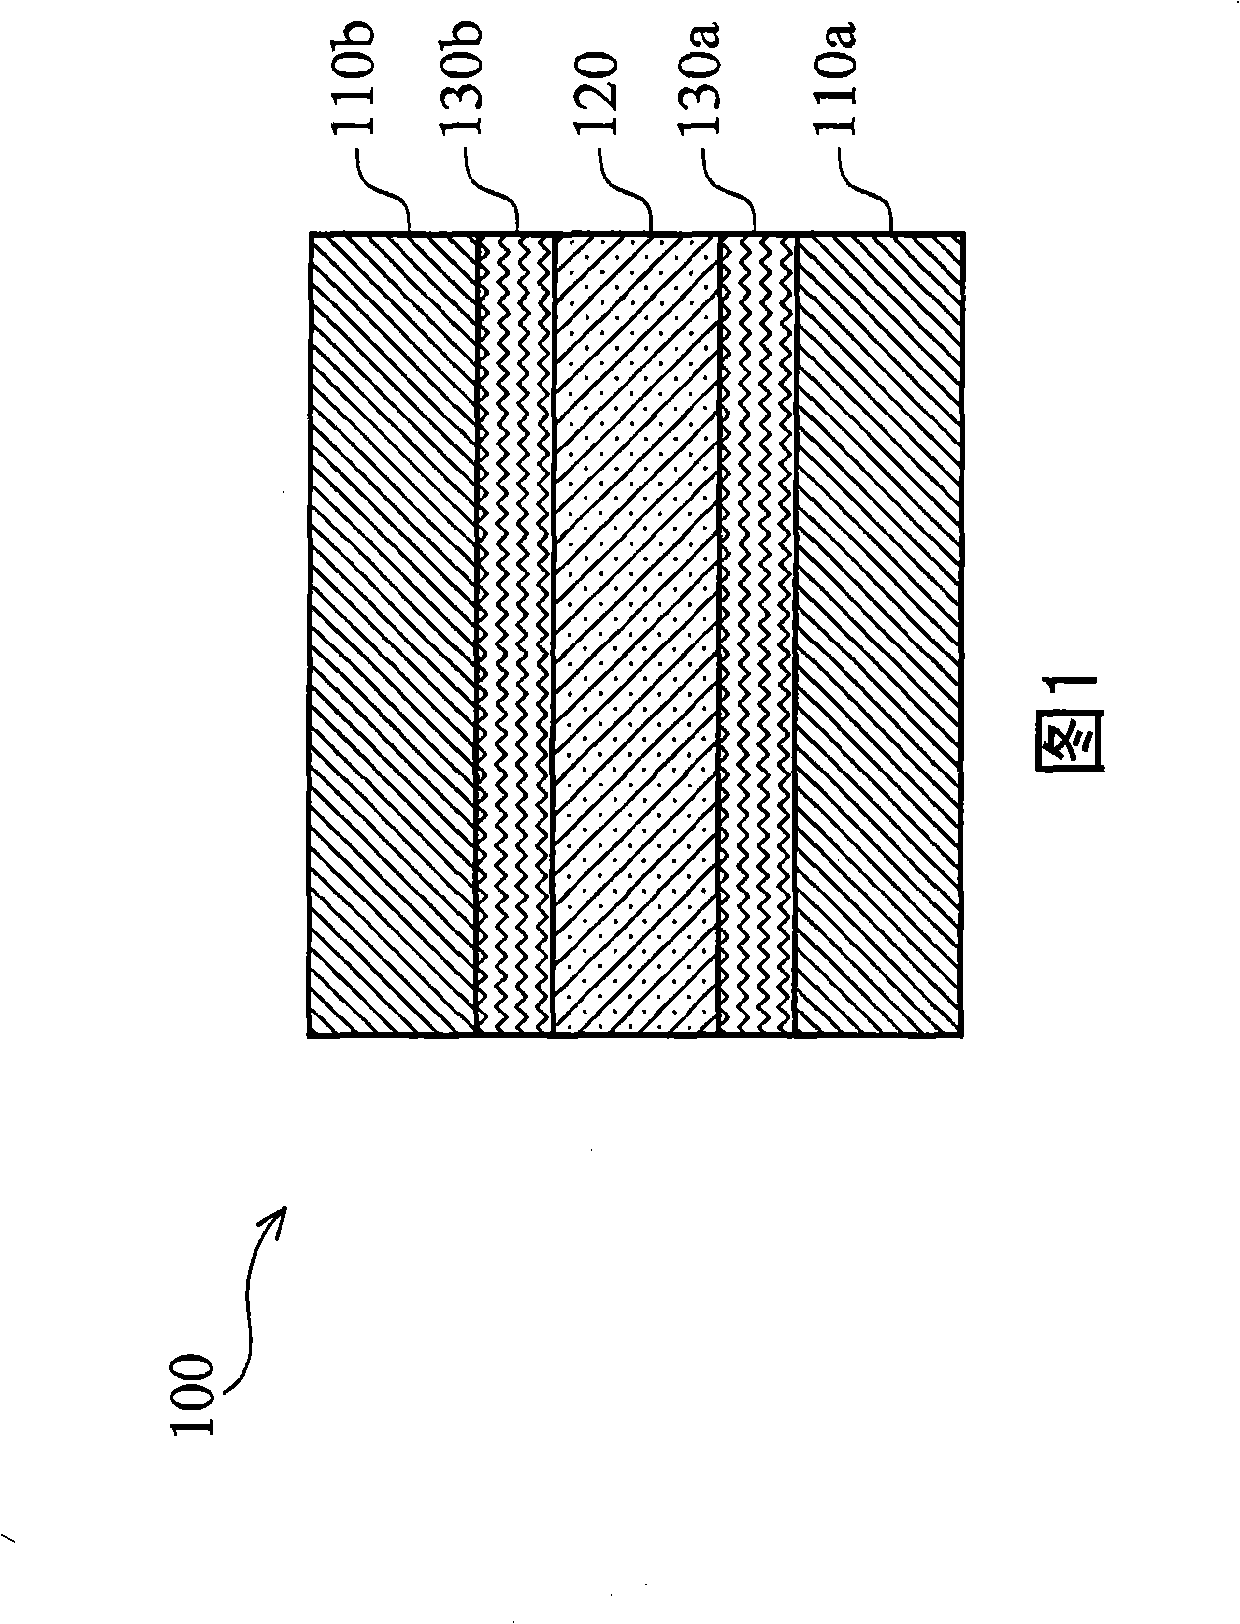 Resistive memory device and stack structure of resistive random access memory device